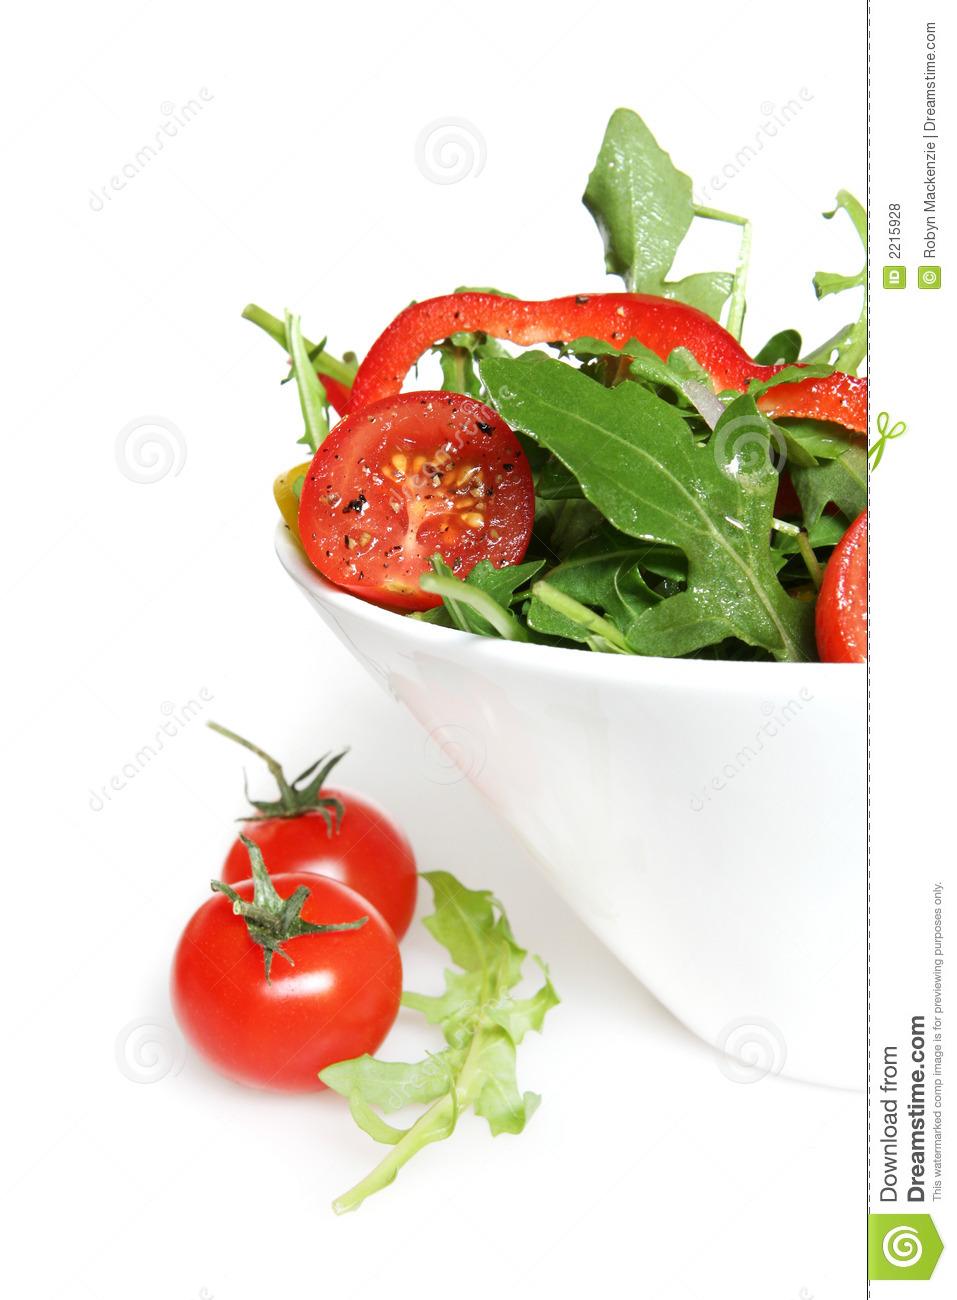 Tossed Salad Royalty Free Stock Photos   Image  2215928